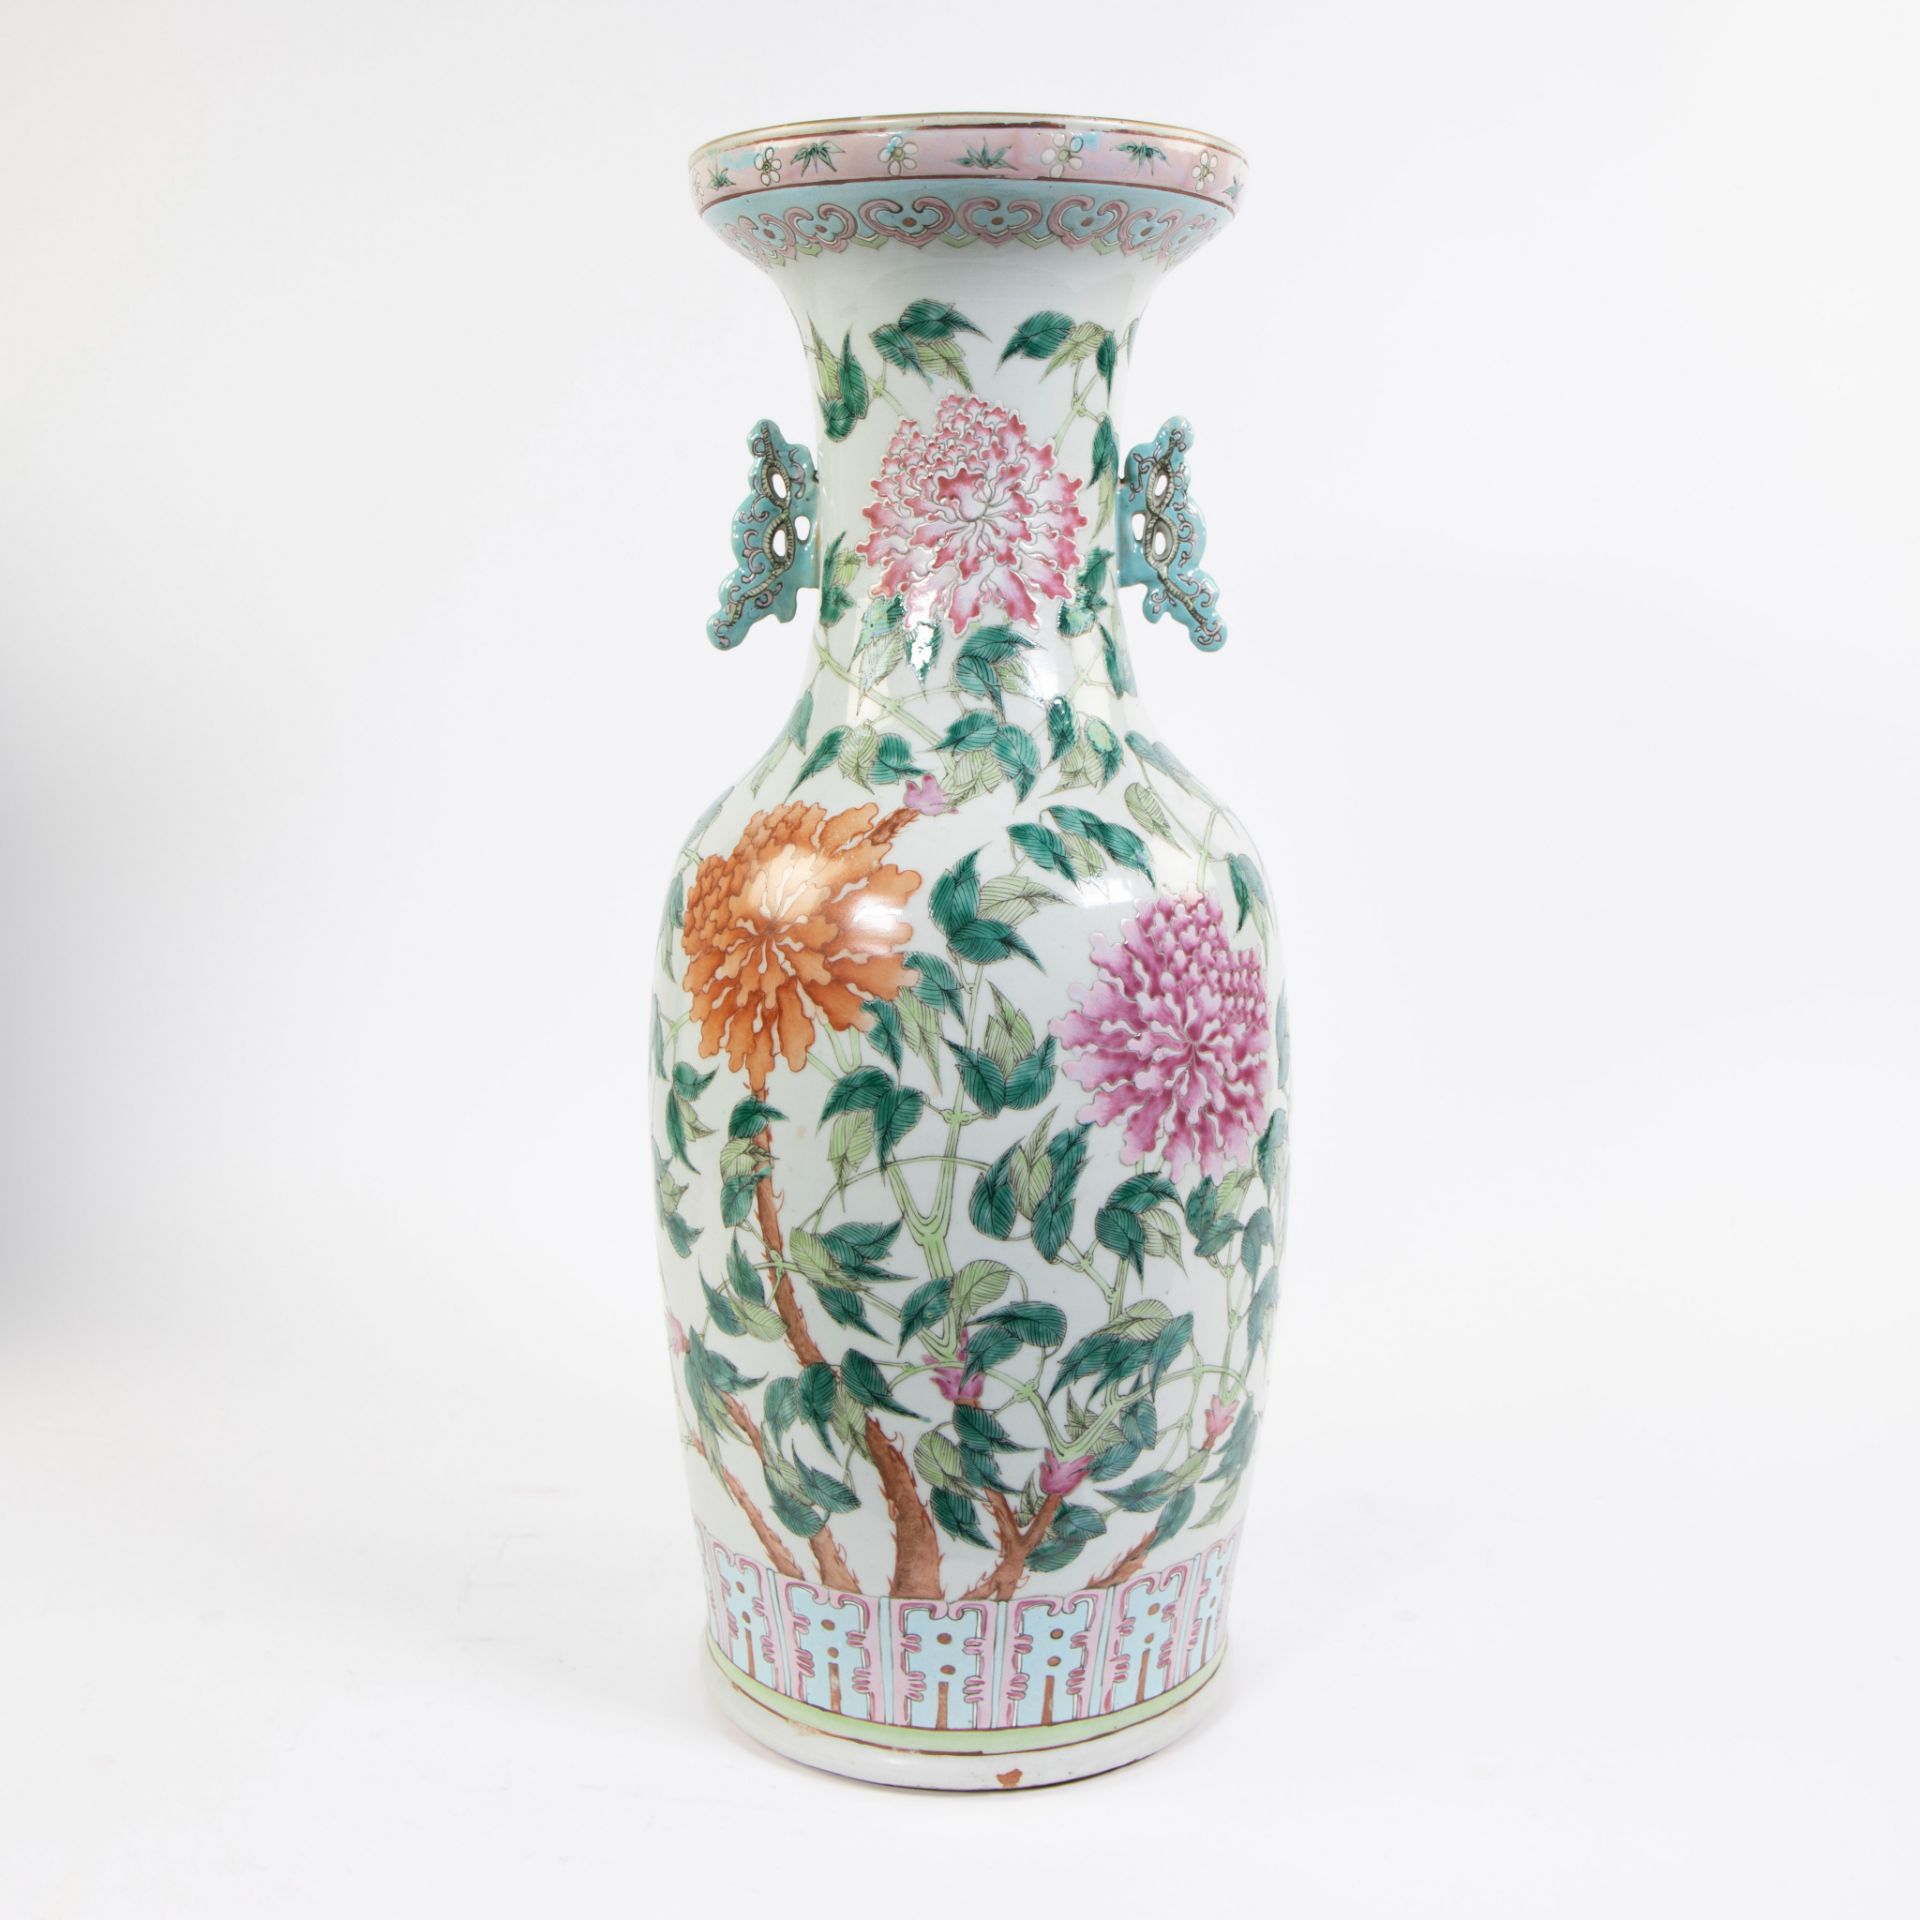 Chinese famille rose vase with butterflies and flowers, 19th C.